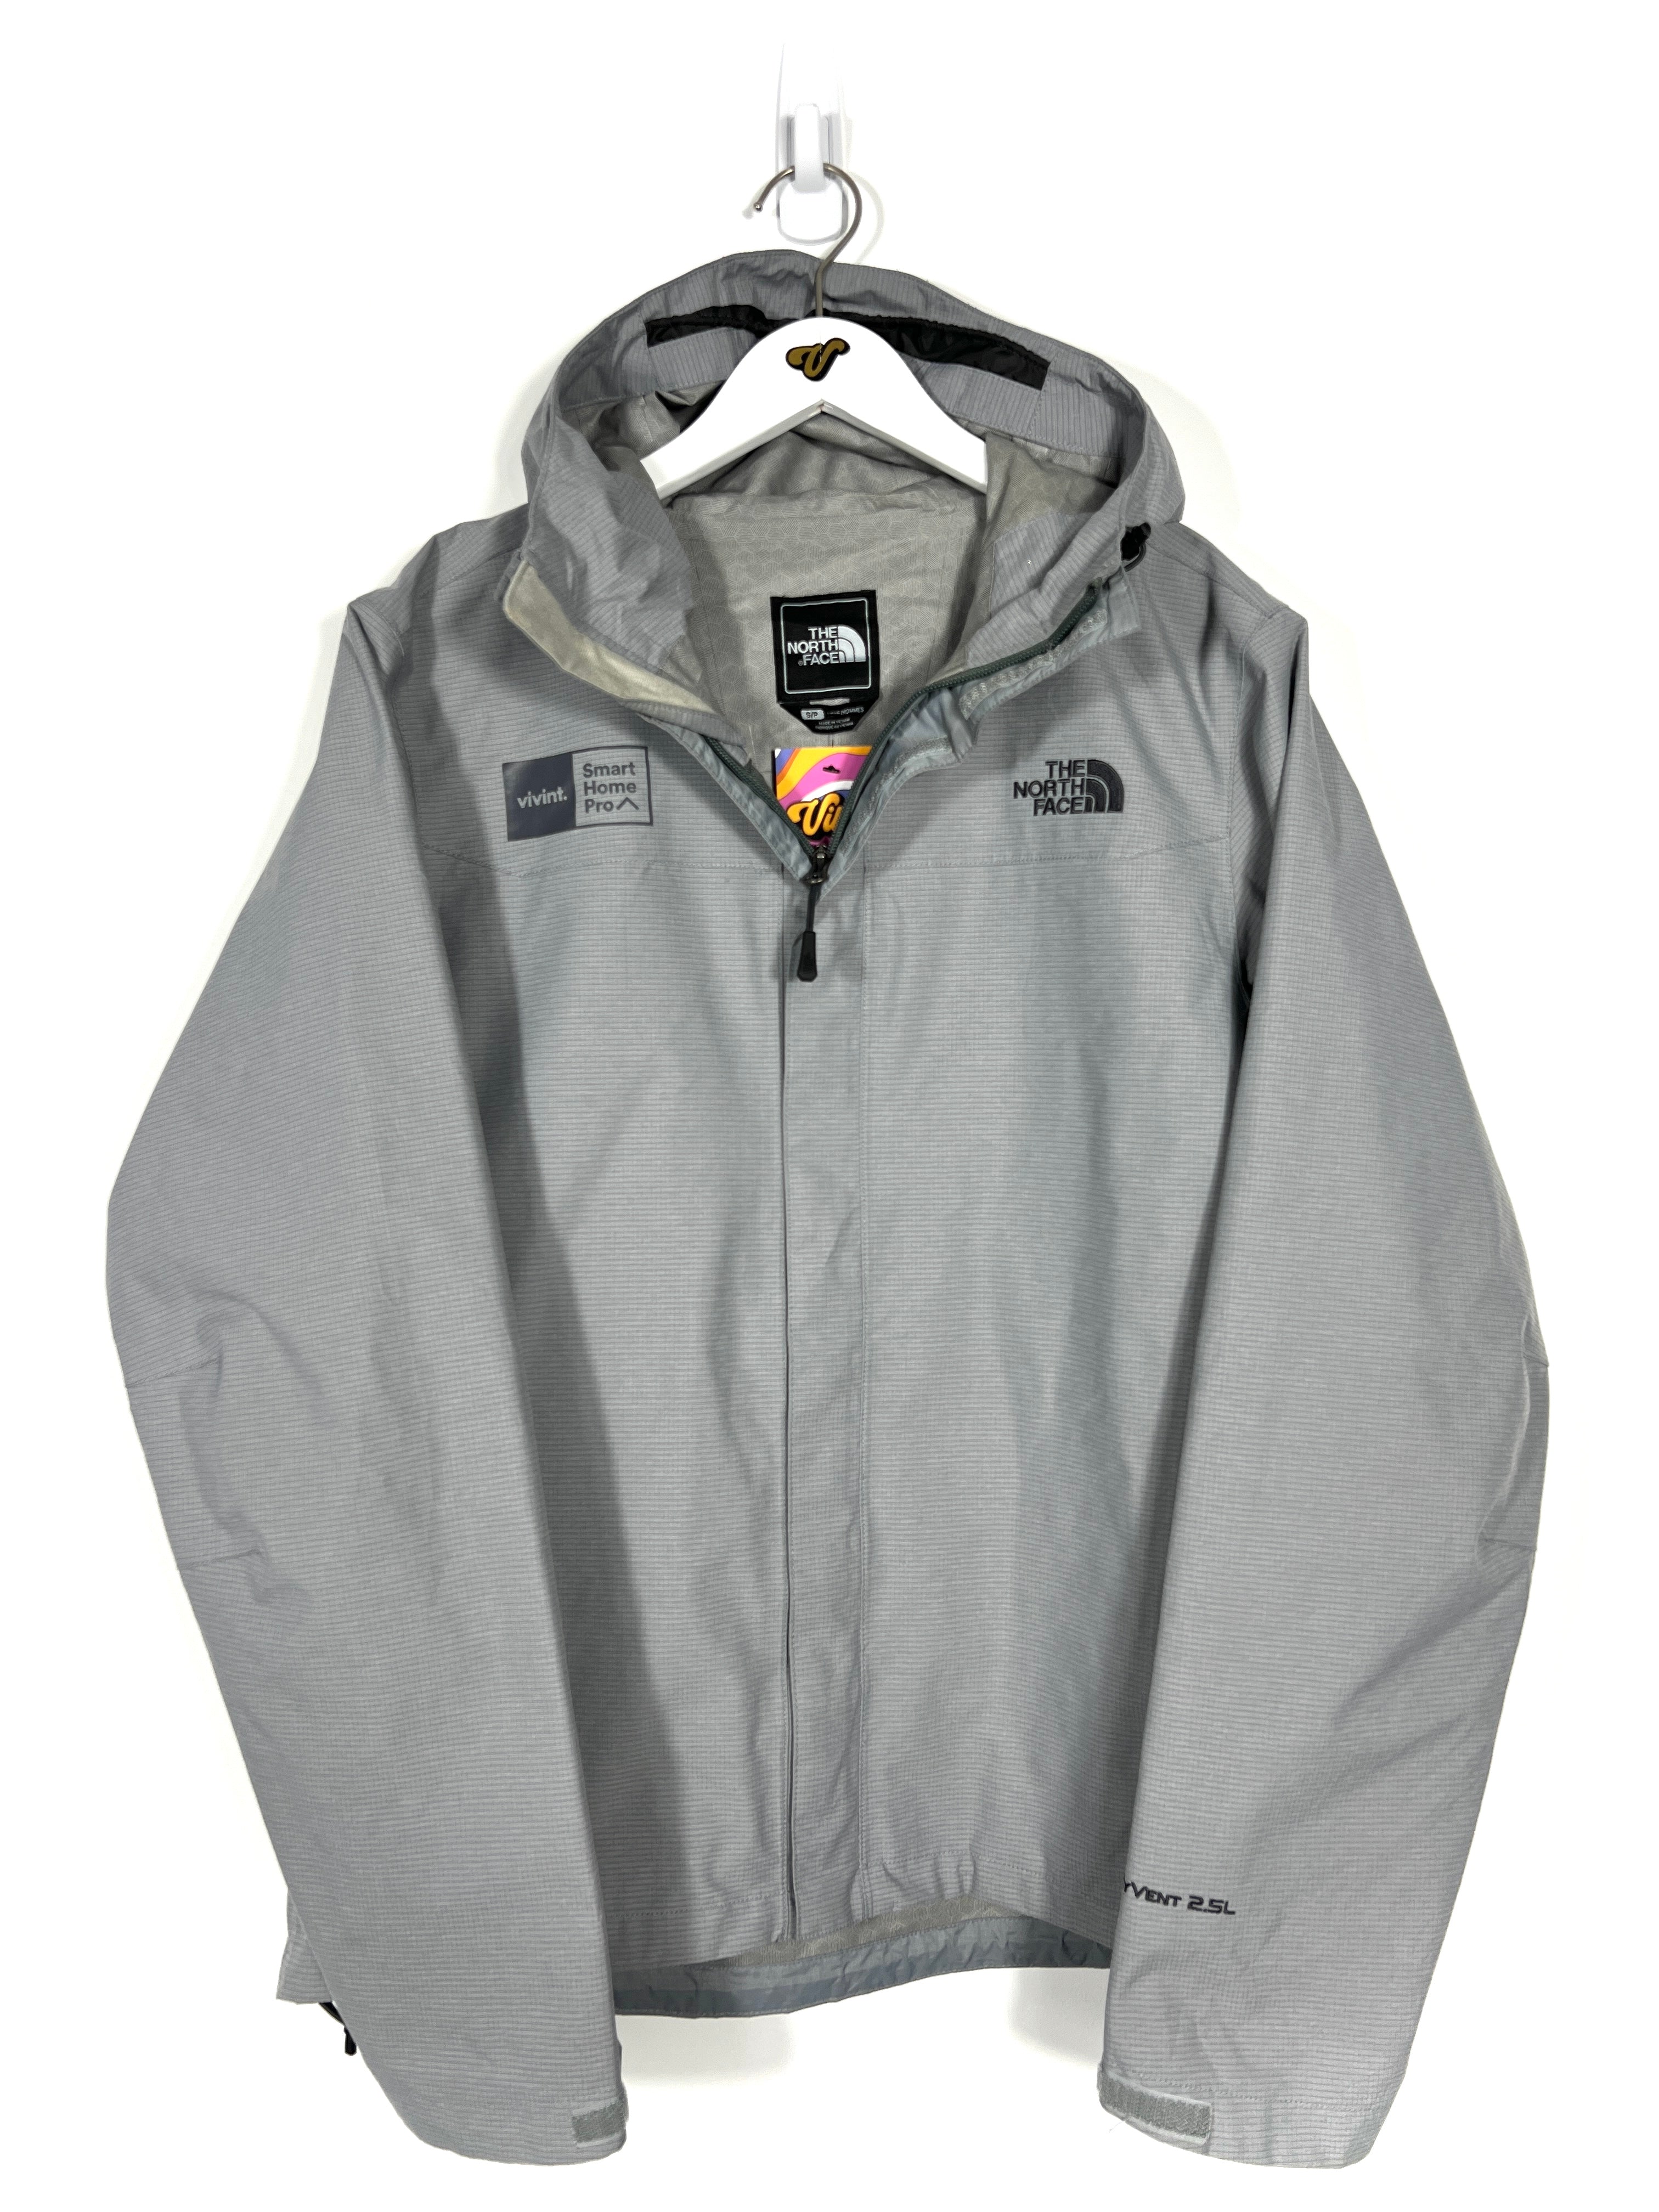 The North Face 2.5L HyVent Jacket - Men's Small